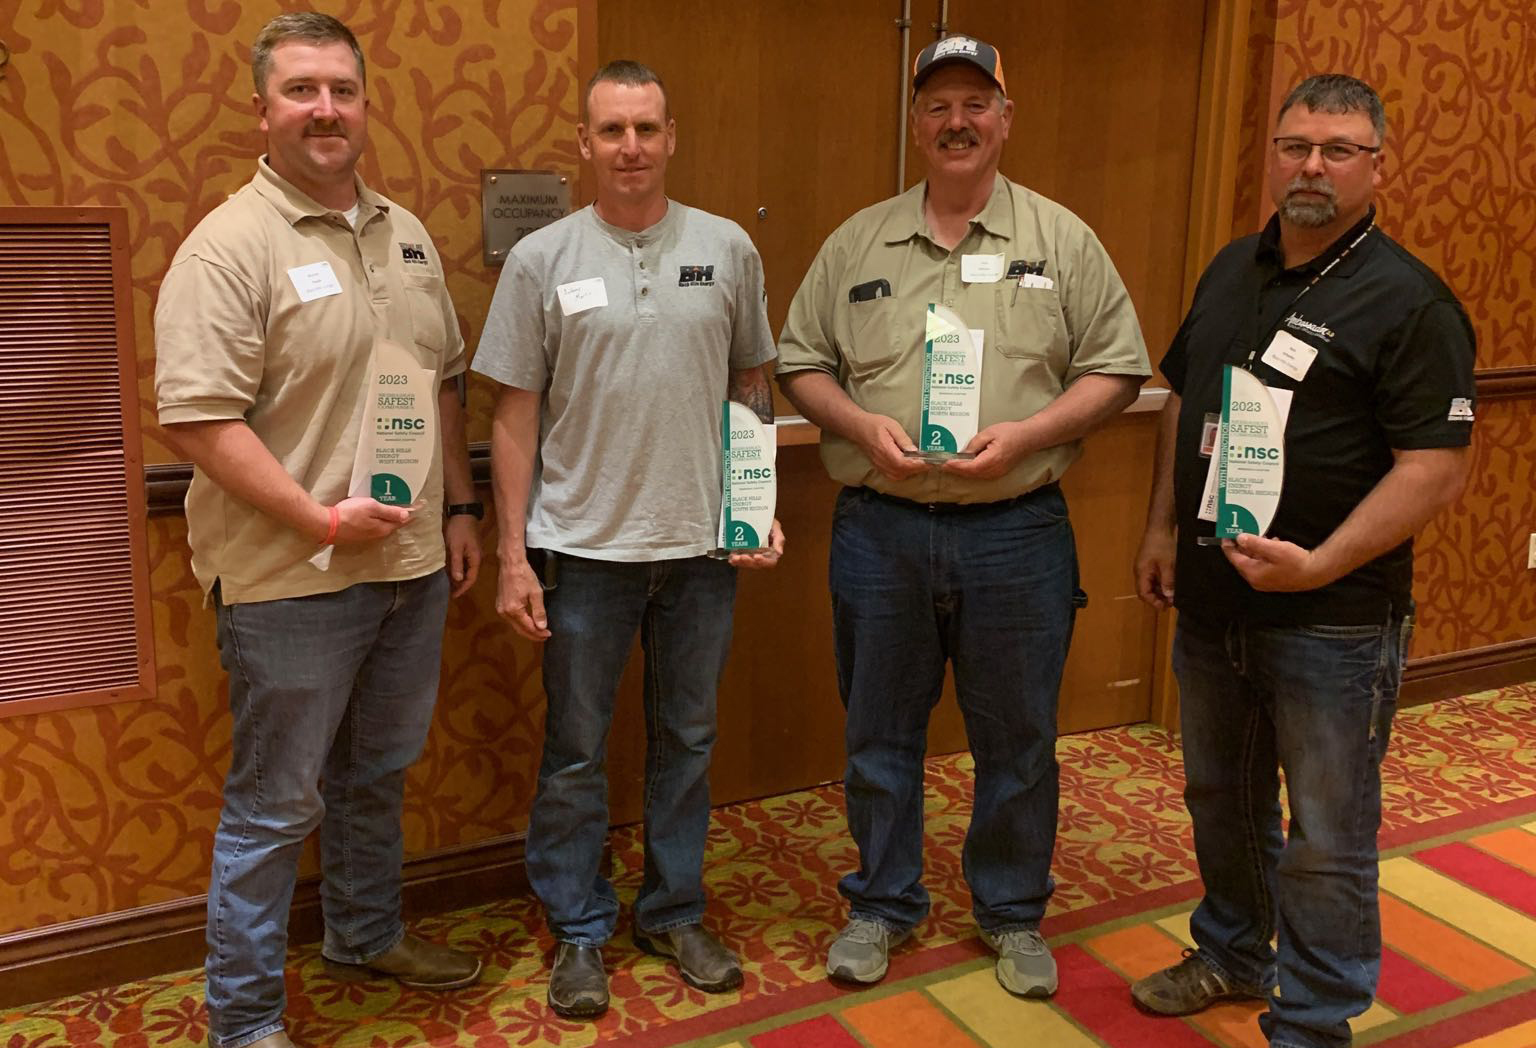 group of men posing with safety awards